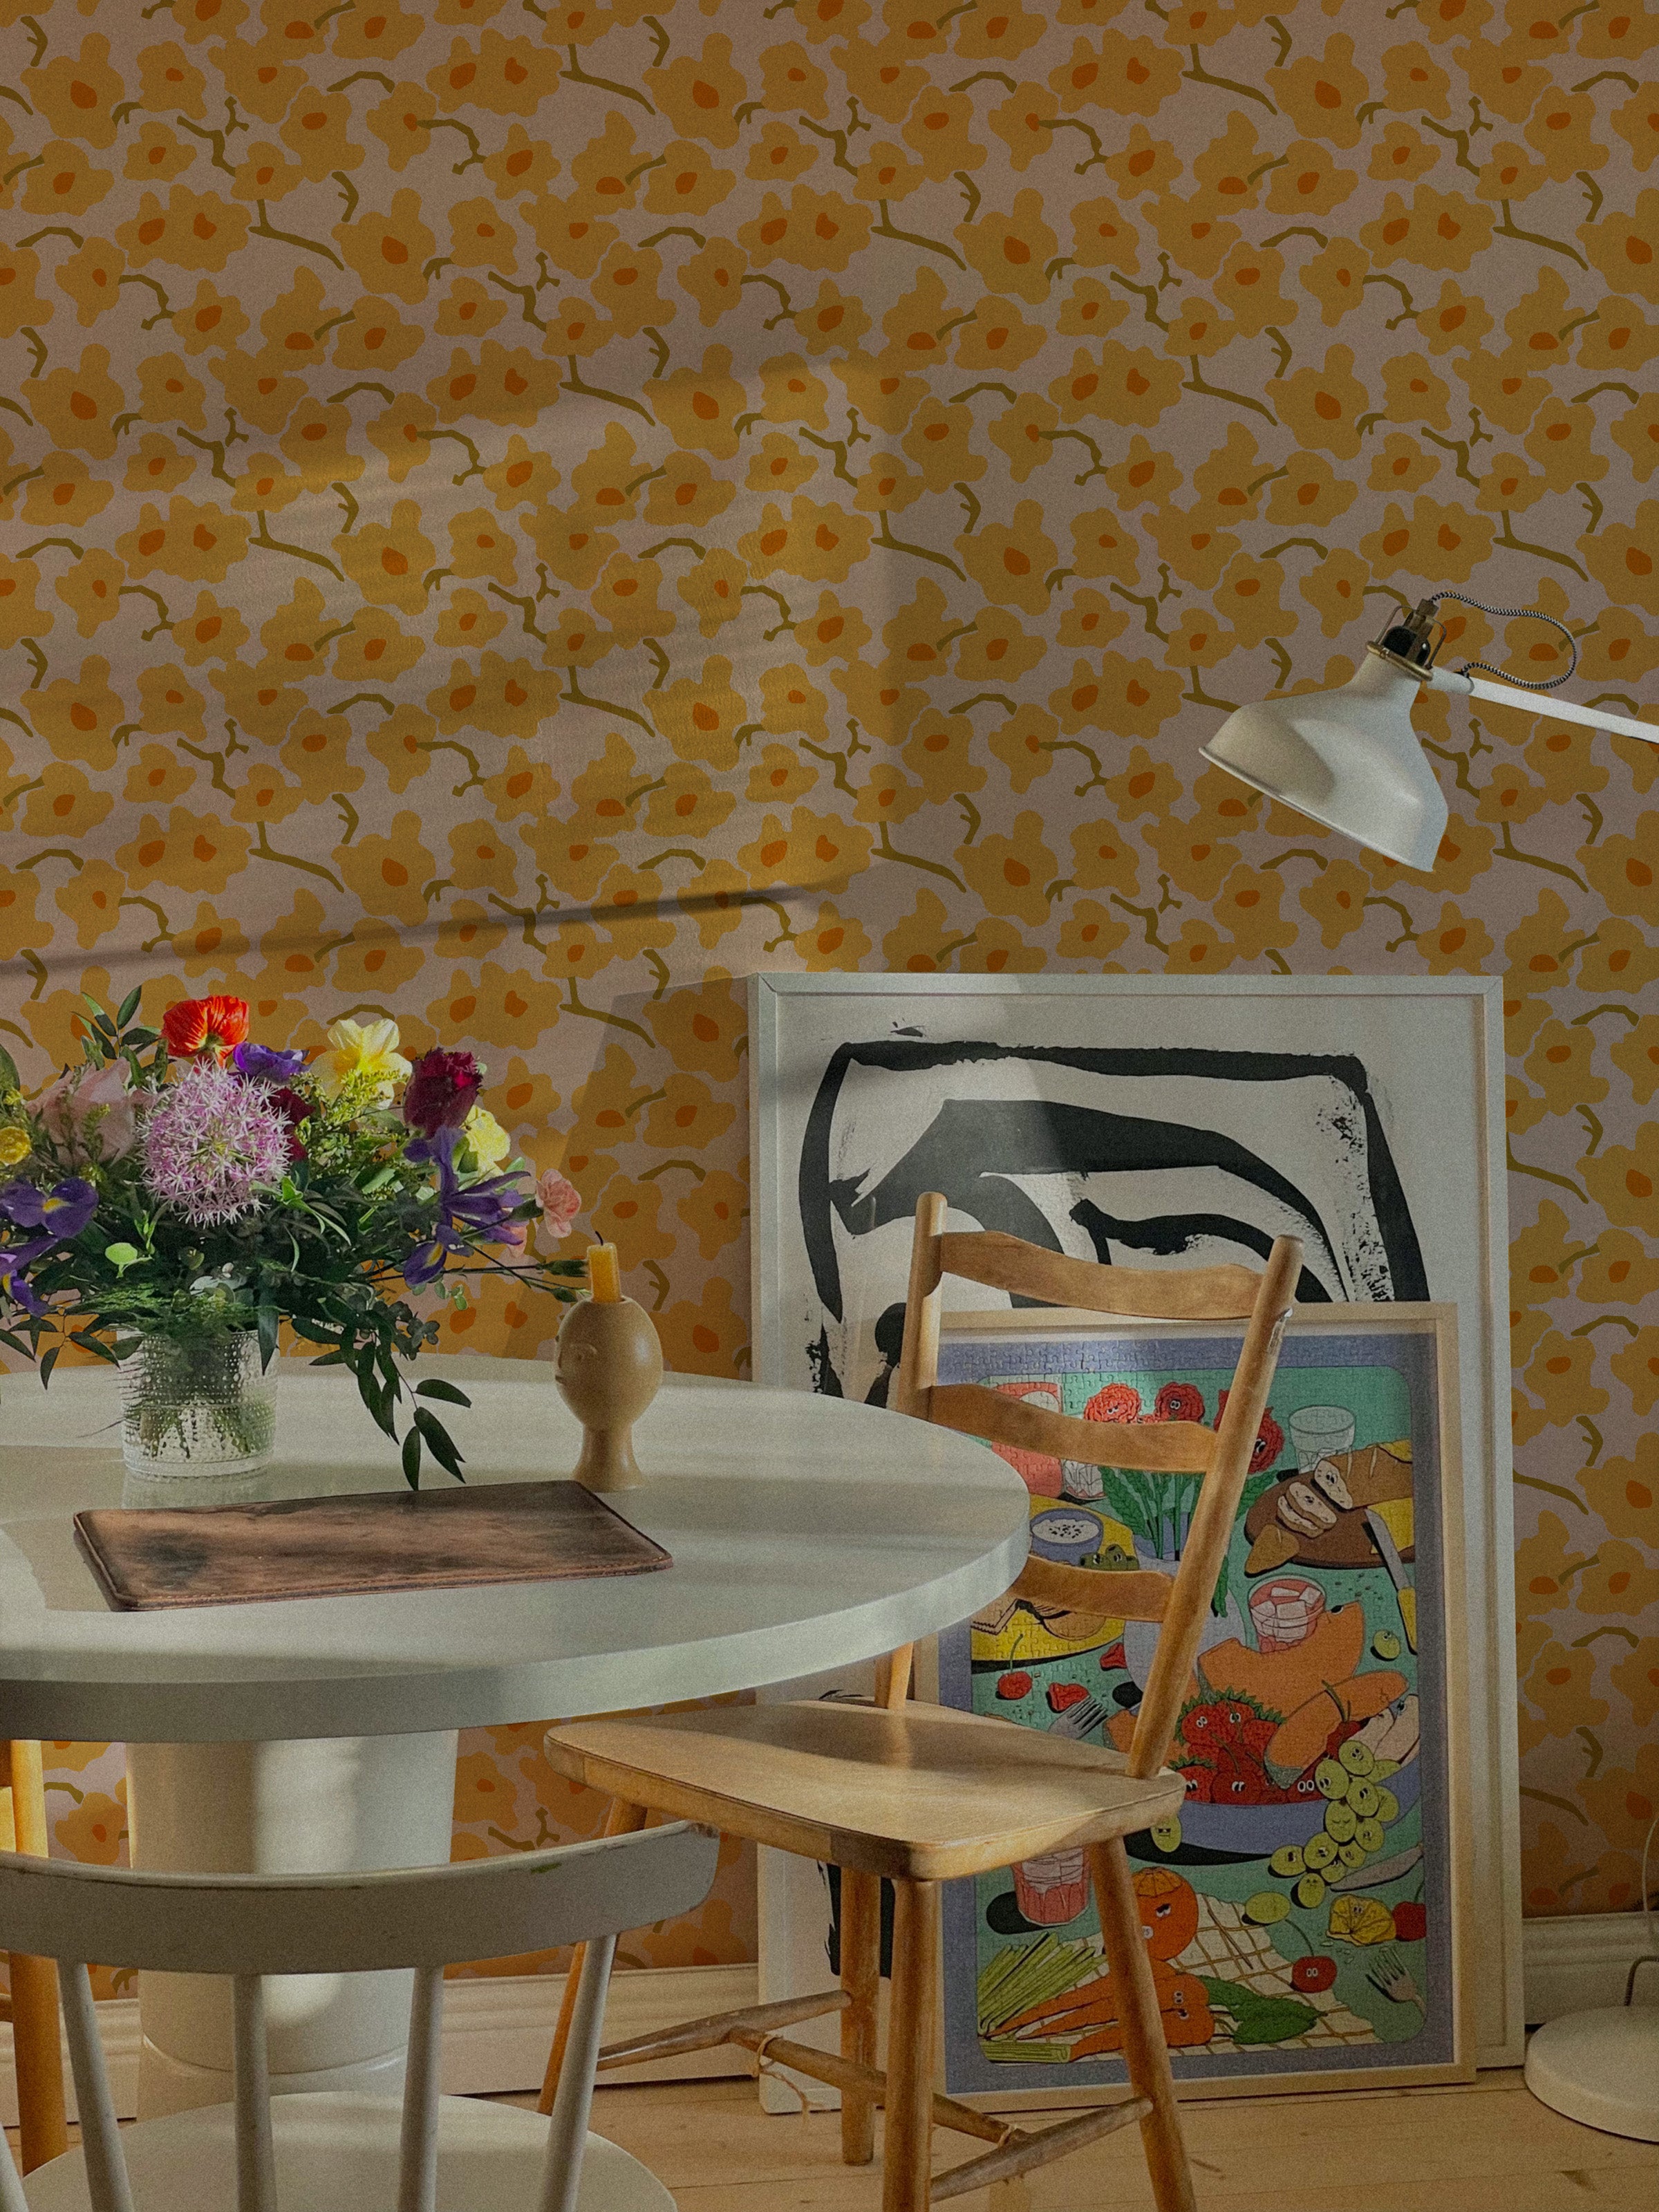 A cozy dining area adorned with Abstract Meadow Wallpaper that brightens the space with its pattern of yellow flowers on a pink background. The room features a circular wooden table, eclectic chairs, and a vibrant mix of art prints and flowers, creating a welcoming and artistic dining experience.